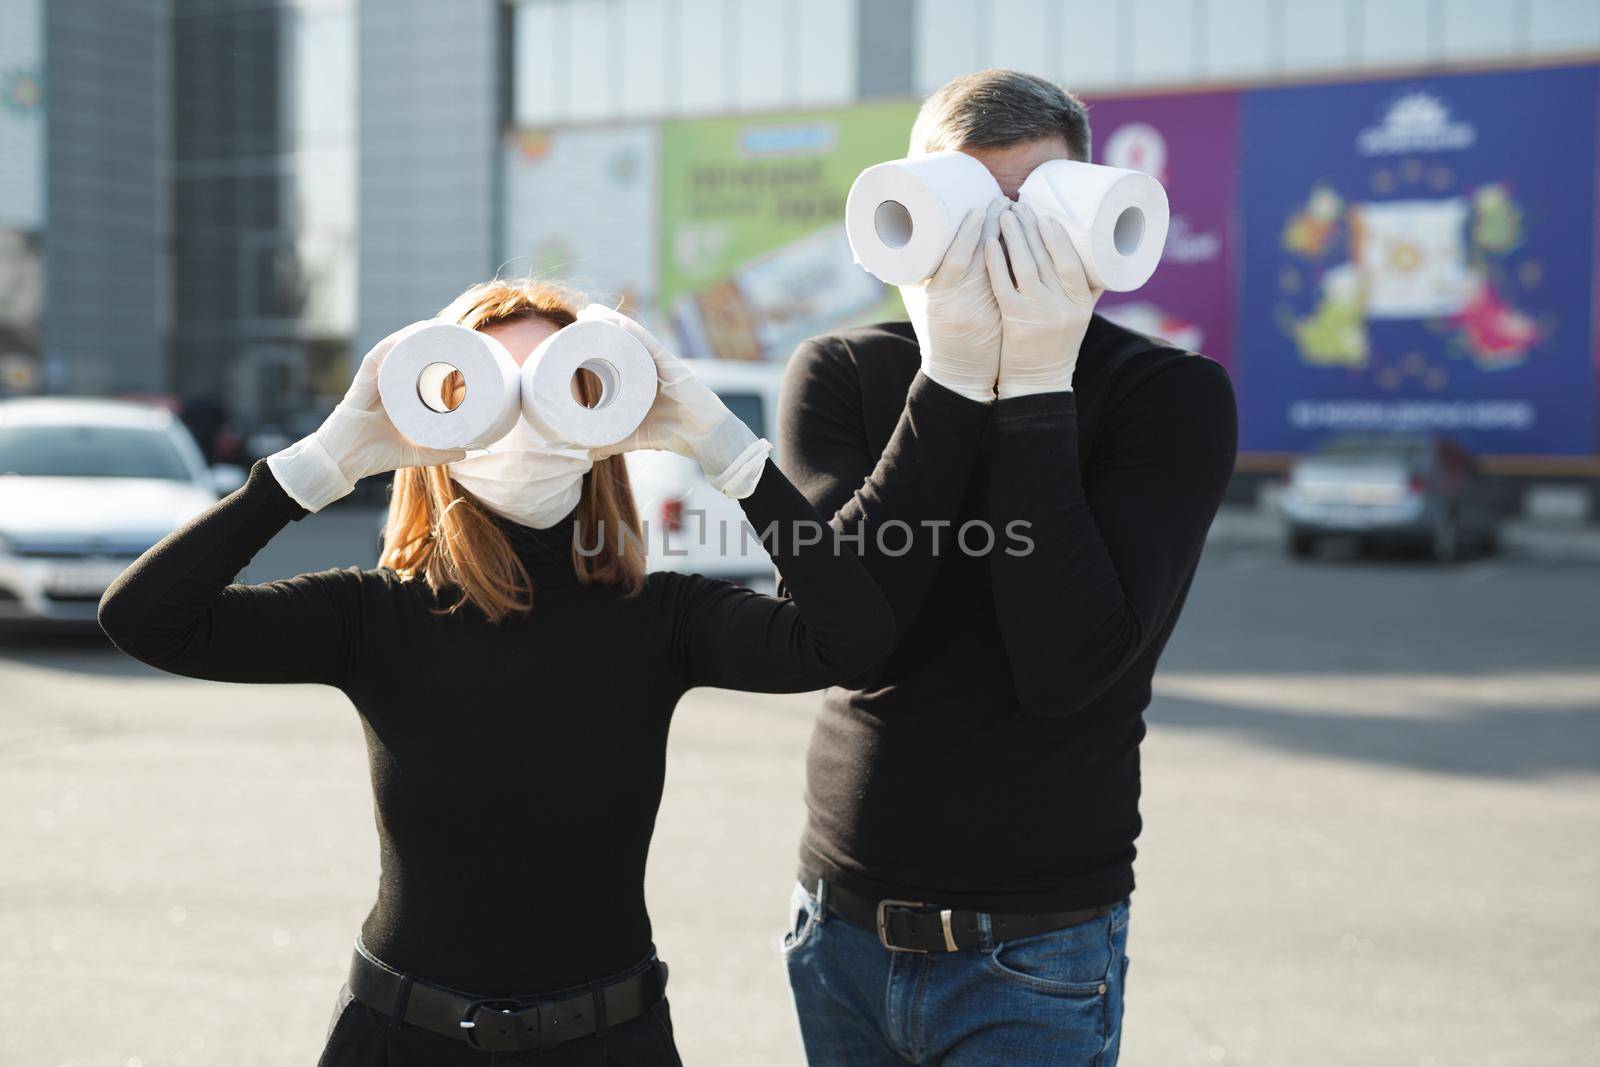 Woman and a man in a coronavirus face mask hold large rolls of toilet paper on a city street and indulge